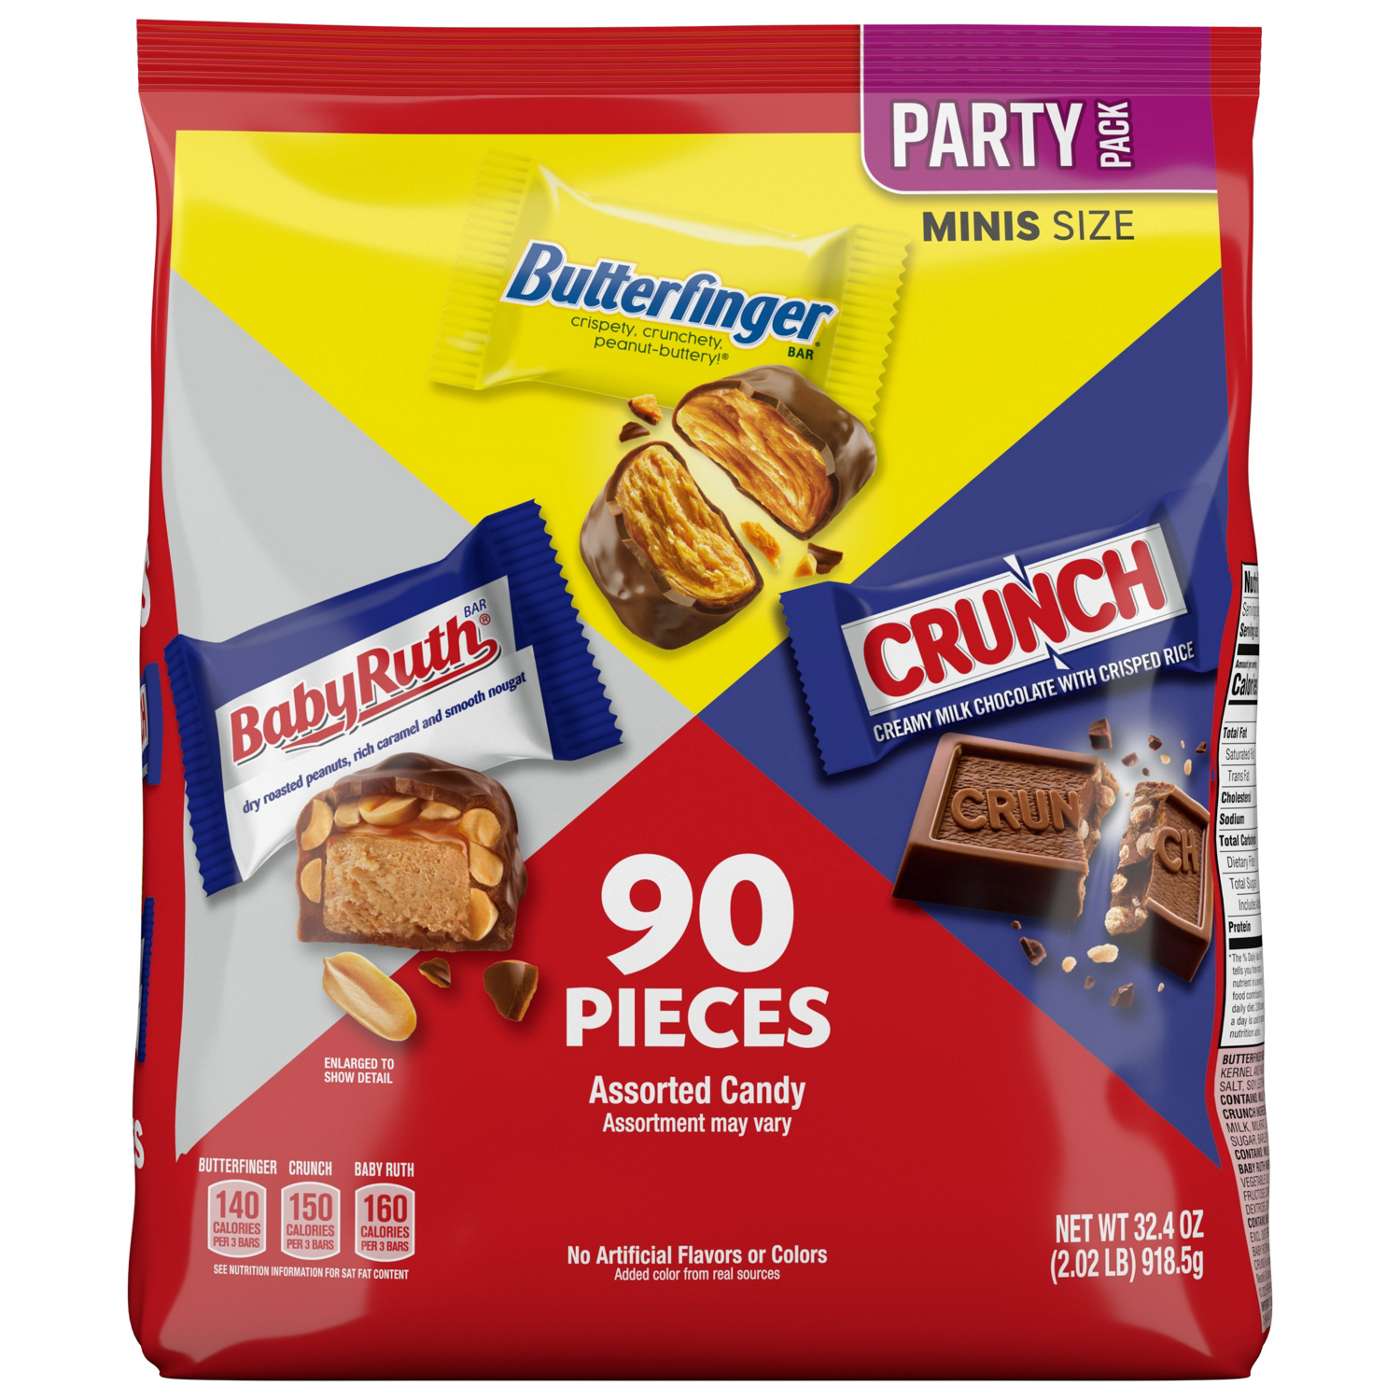 Crunch, Butterfinger, & Baby Ruth Assorted Chocolate Mini Size Candy Bars - Party Pack; image 1 of 8